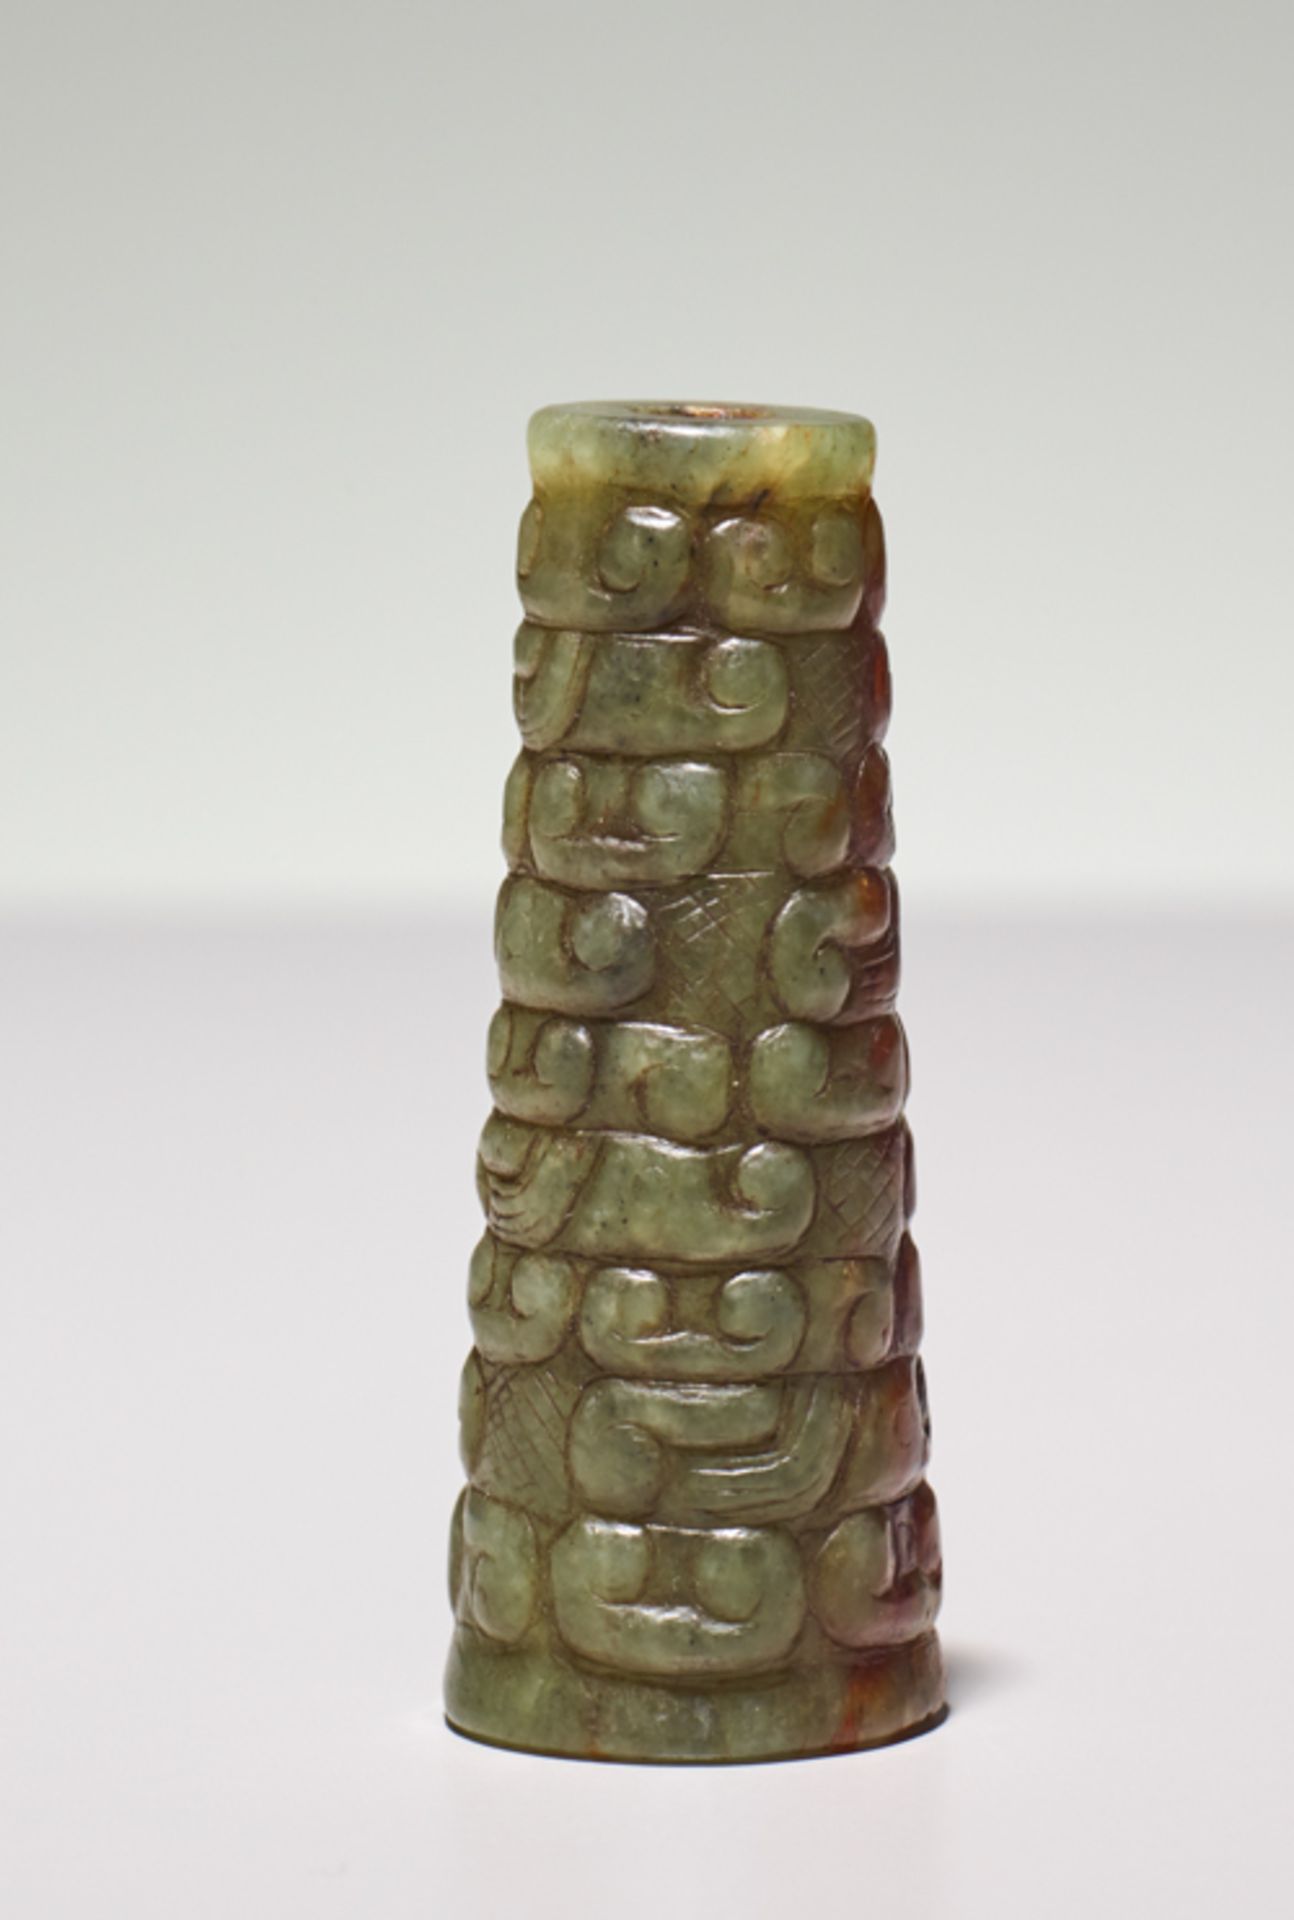 CONICAL BEADJade. China, Eastern Zhou, 5th century BCDuring the Eastern Zhou period, beads like this - Image 2 of 6